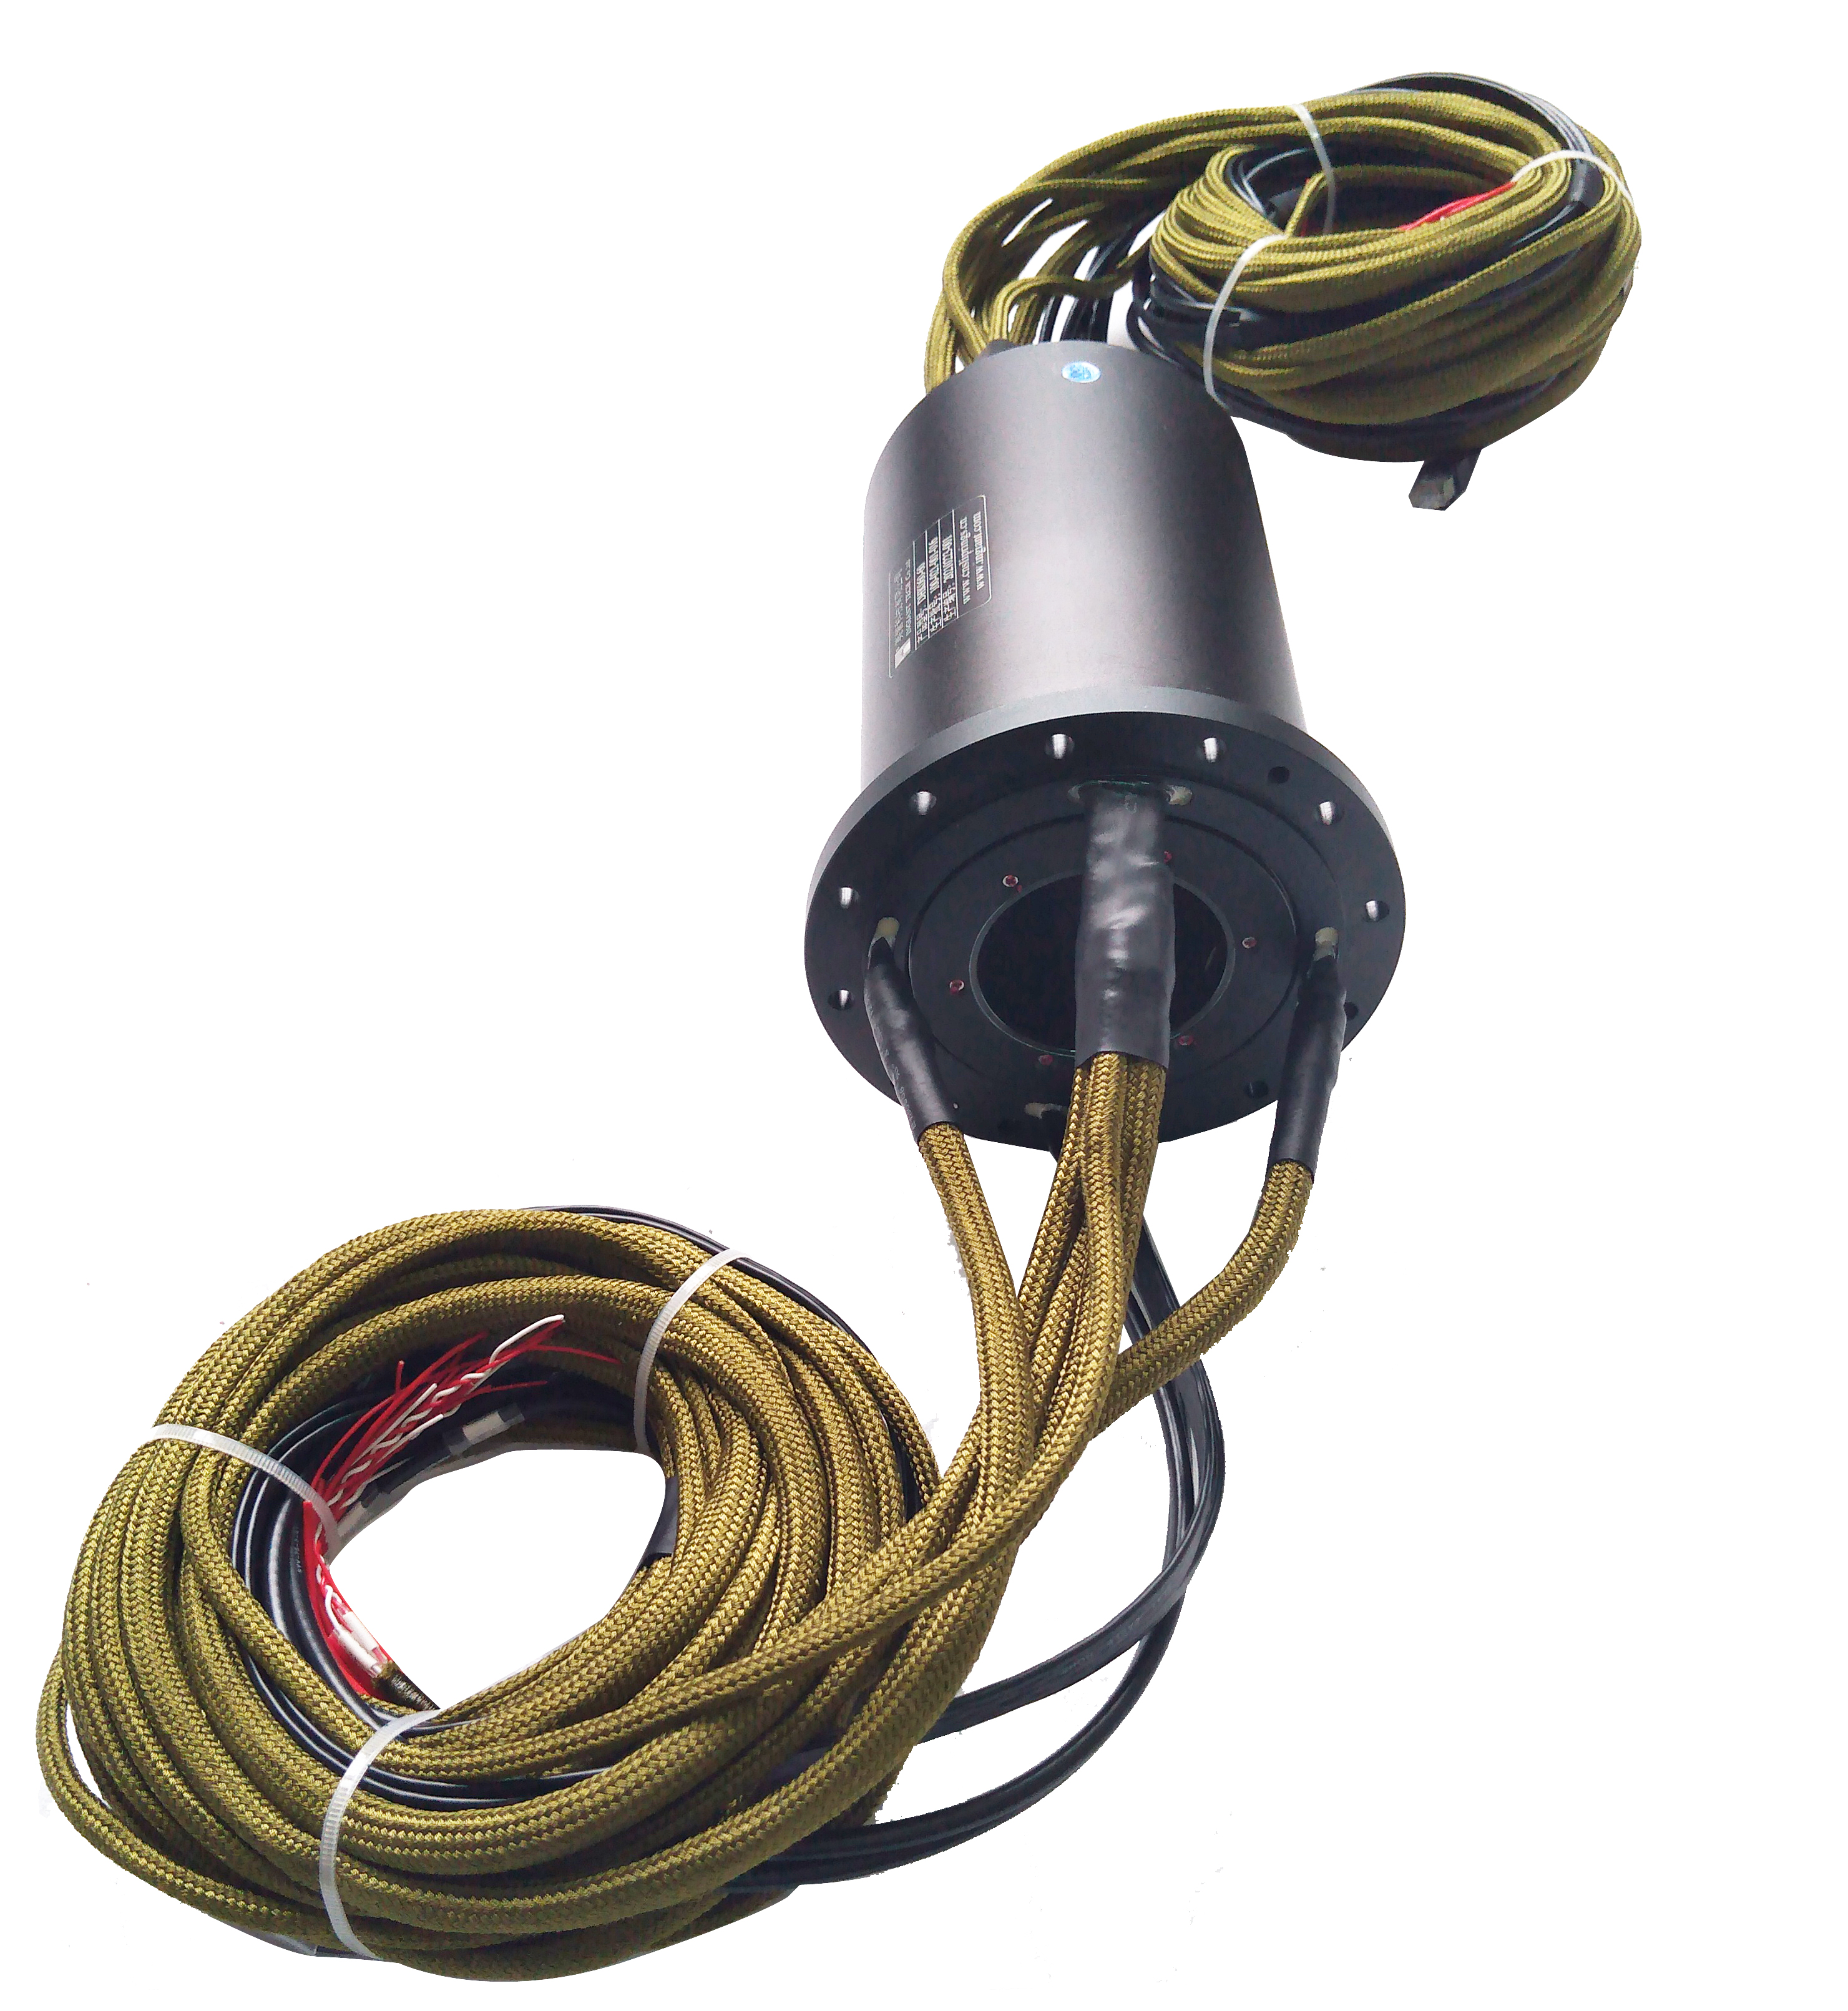 Ingiant through bore slip ring for capping machines Featured Image